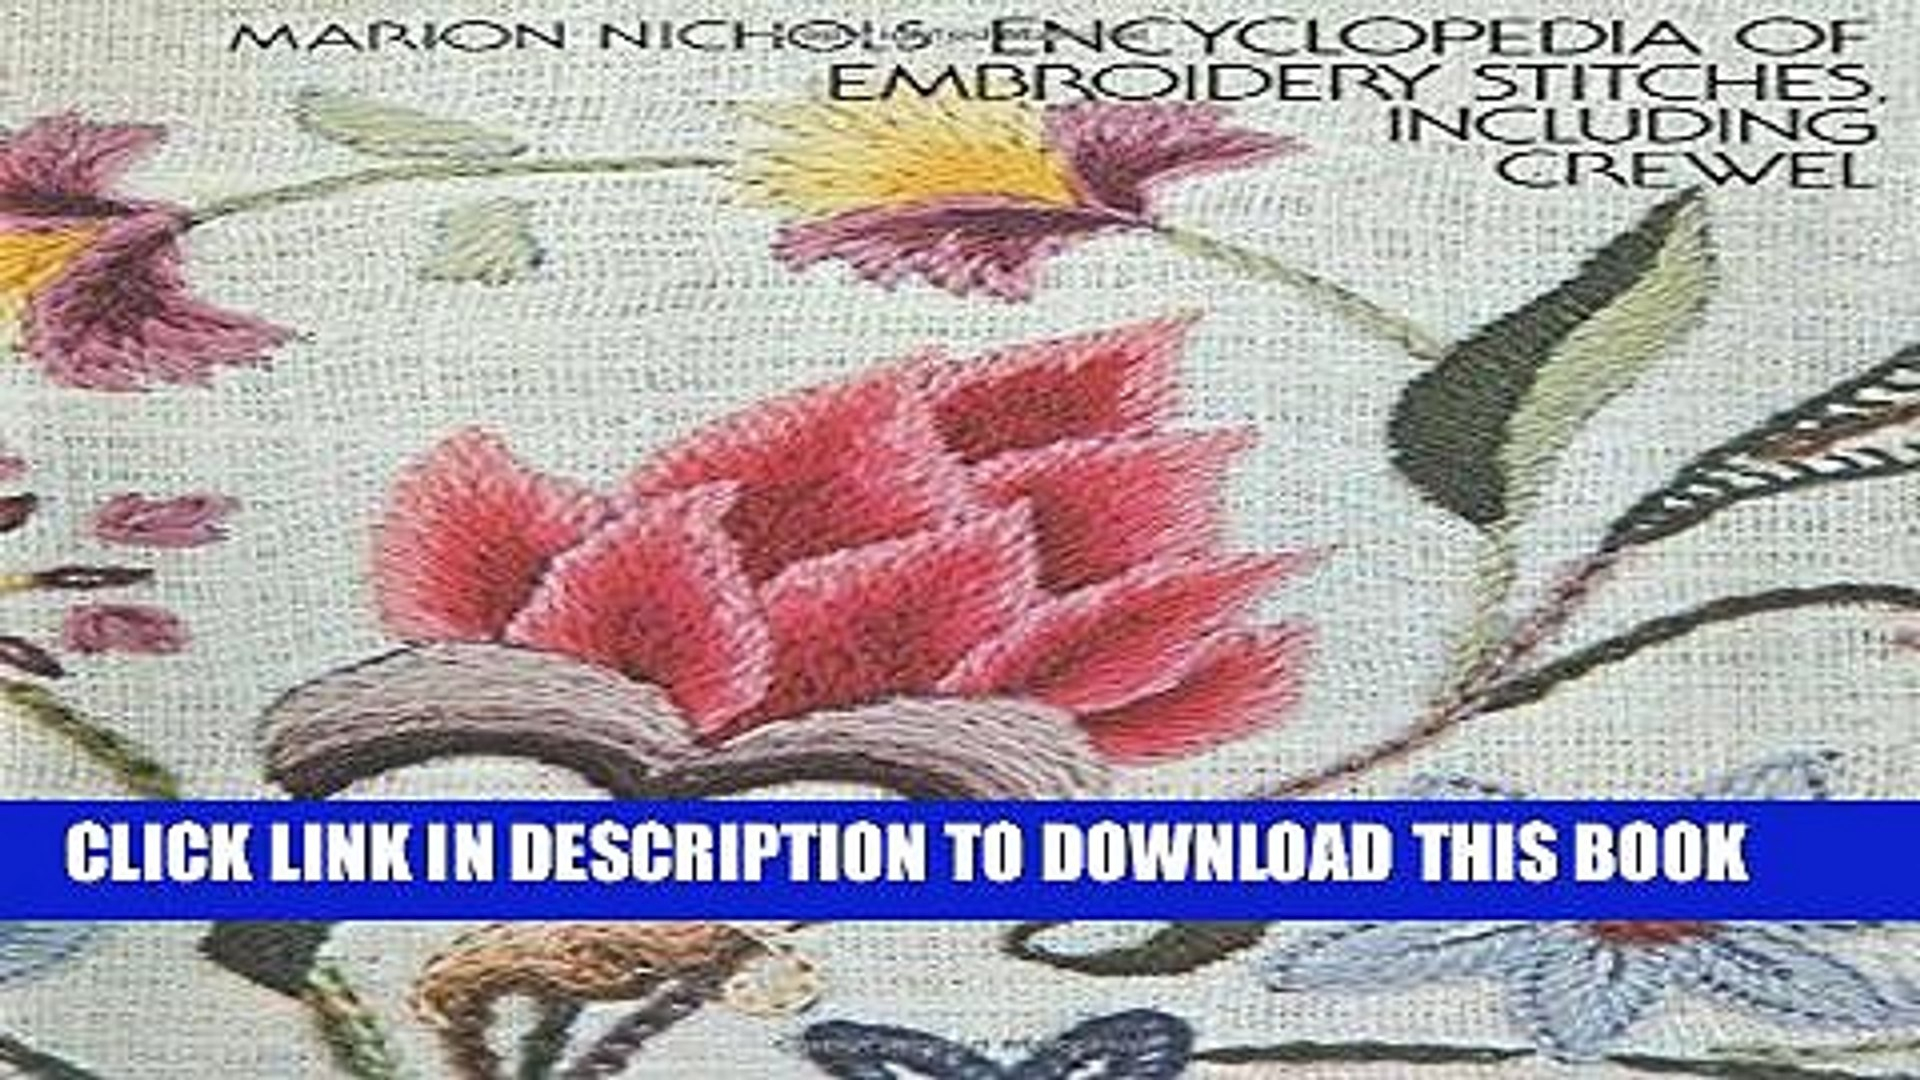 Free Crewel Embroidery Patterns E Book Encyclopedia Of Embroidery Stitches Including Crewel Dover